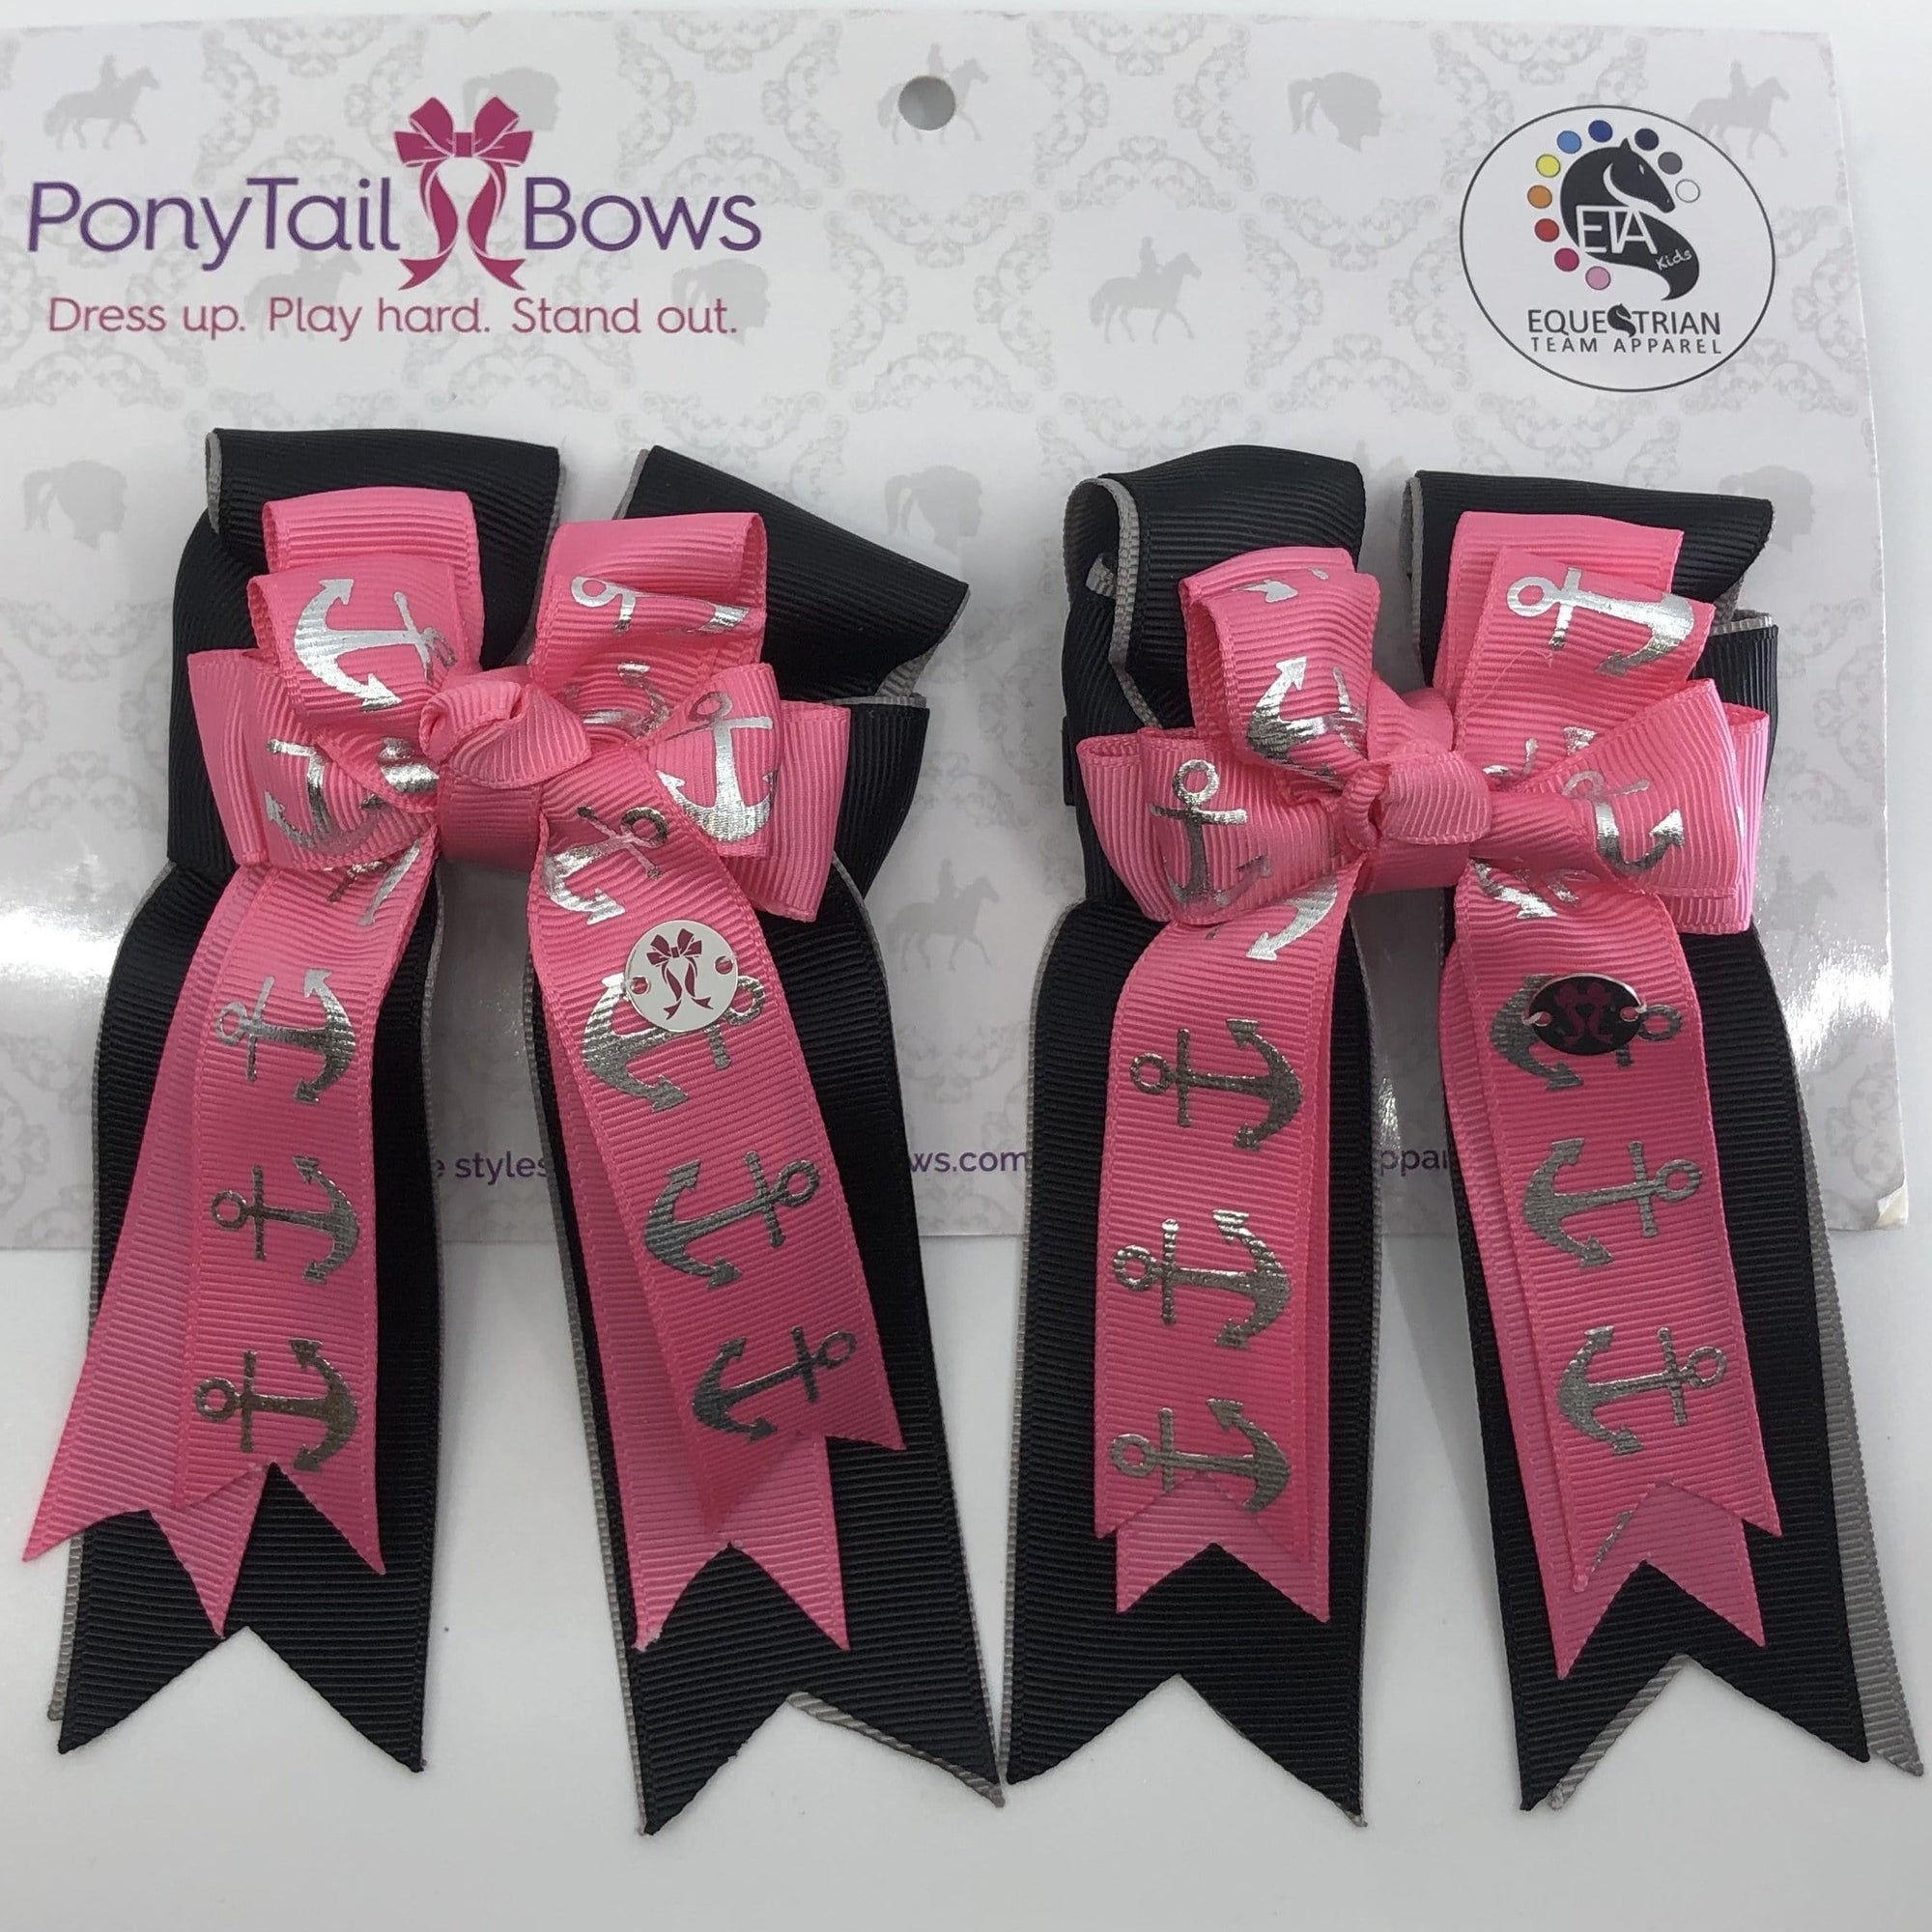 PonyTail Bows 3" Tails Pink Anchors PonyTail Bows equestrian team apparel online tack store mobile tack store custom farm apparel custom show stable clothing equestrian lifestyle horse show clothing riding clothes PonyTail Bows | Equestrian Hair Accessories horses equestrian tack store